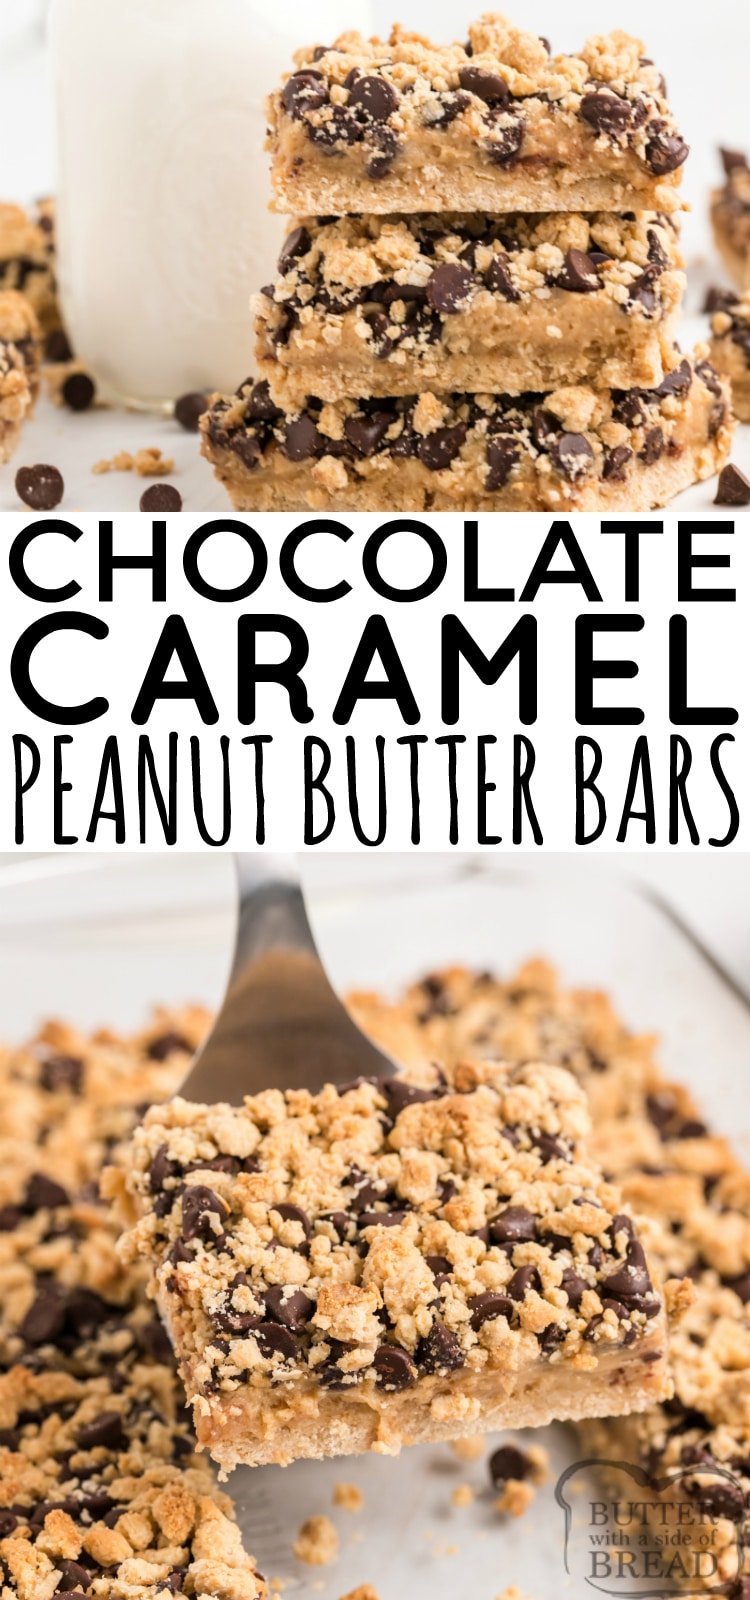 Chocolate Caramel Peanut Butter Bars begin with a cake mix and end with peanut butter, caramel topping, cream cheese, and chocolate! This amazing dessert bar recipe combine all of your favorite flavors in one delectable treat!